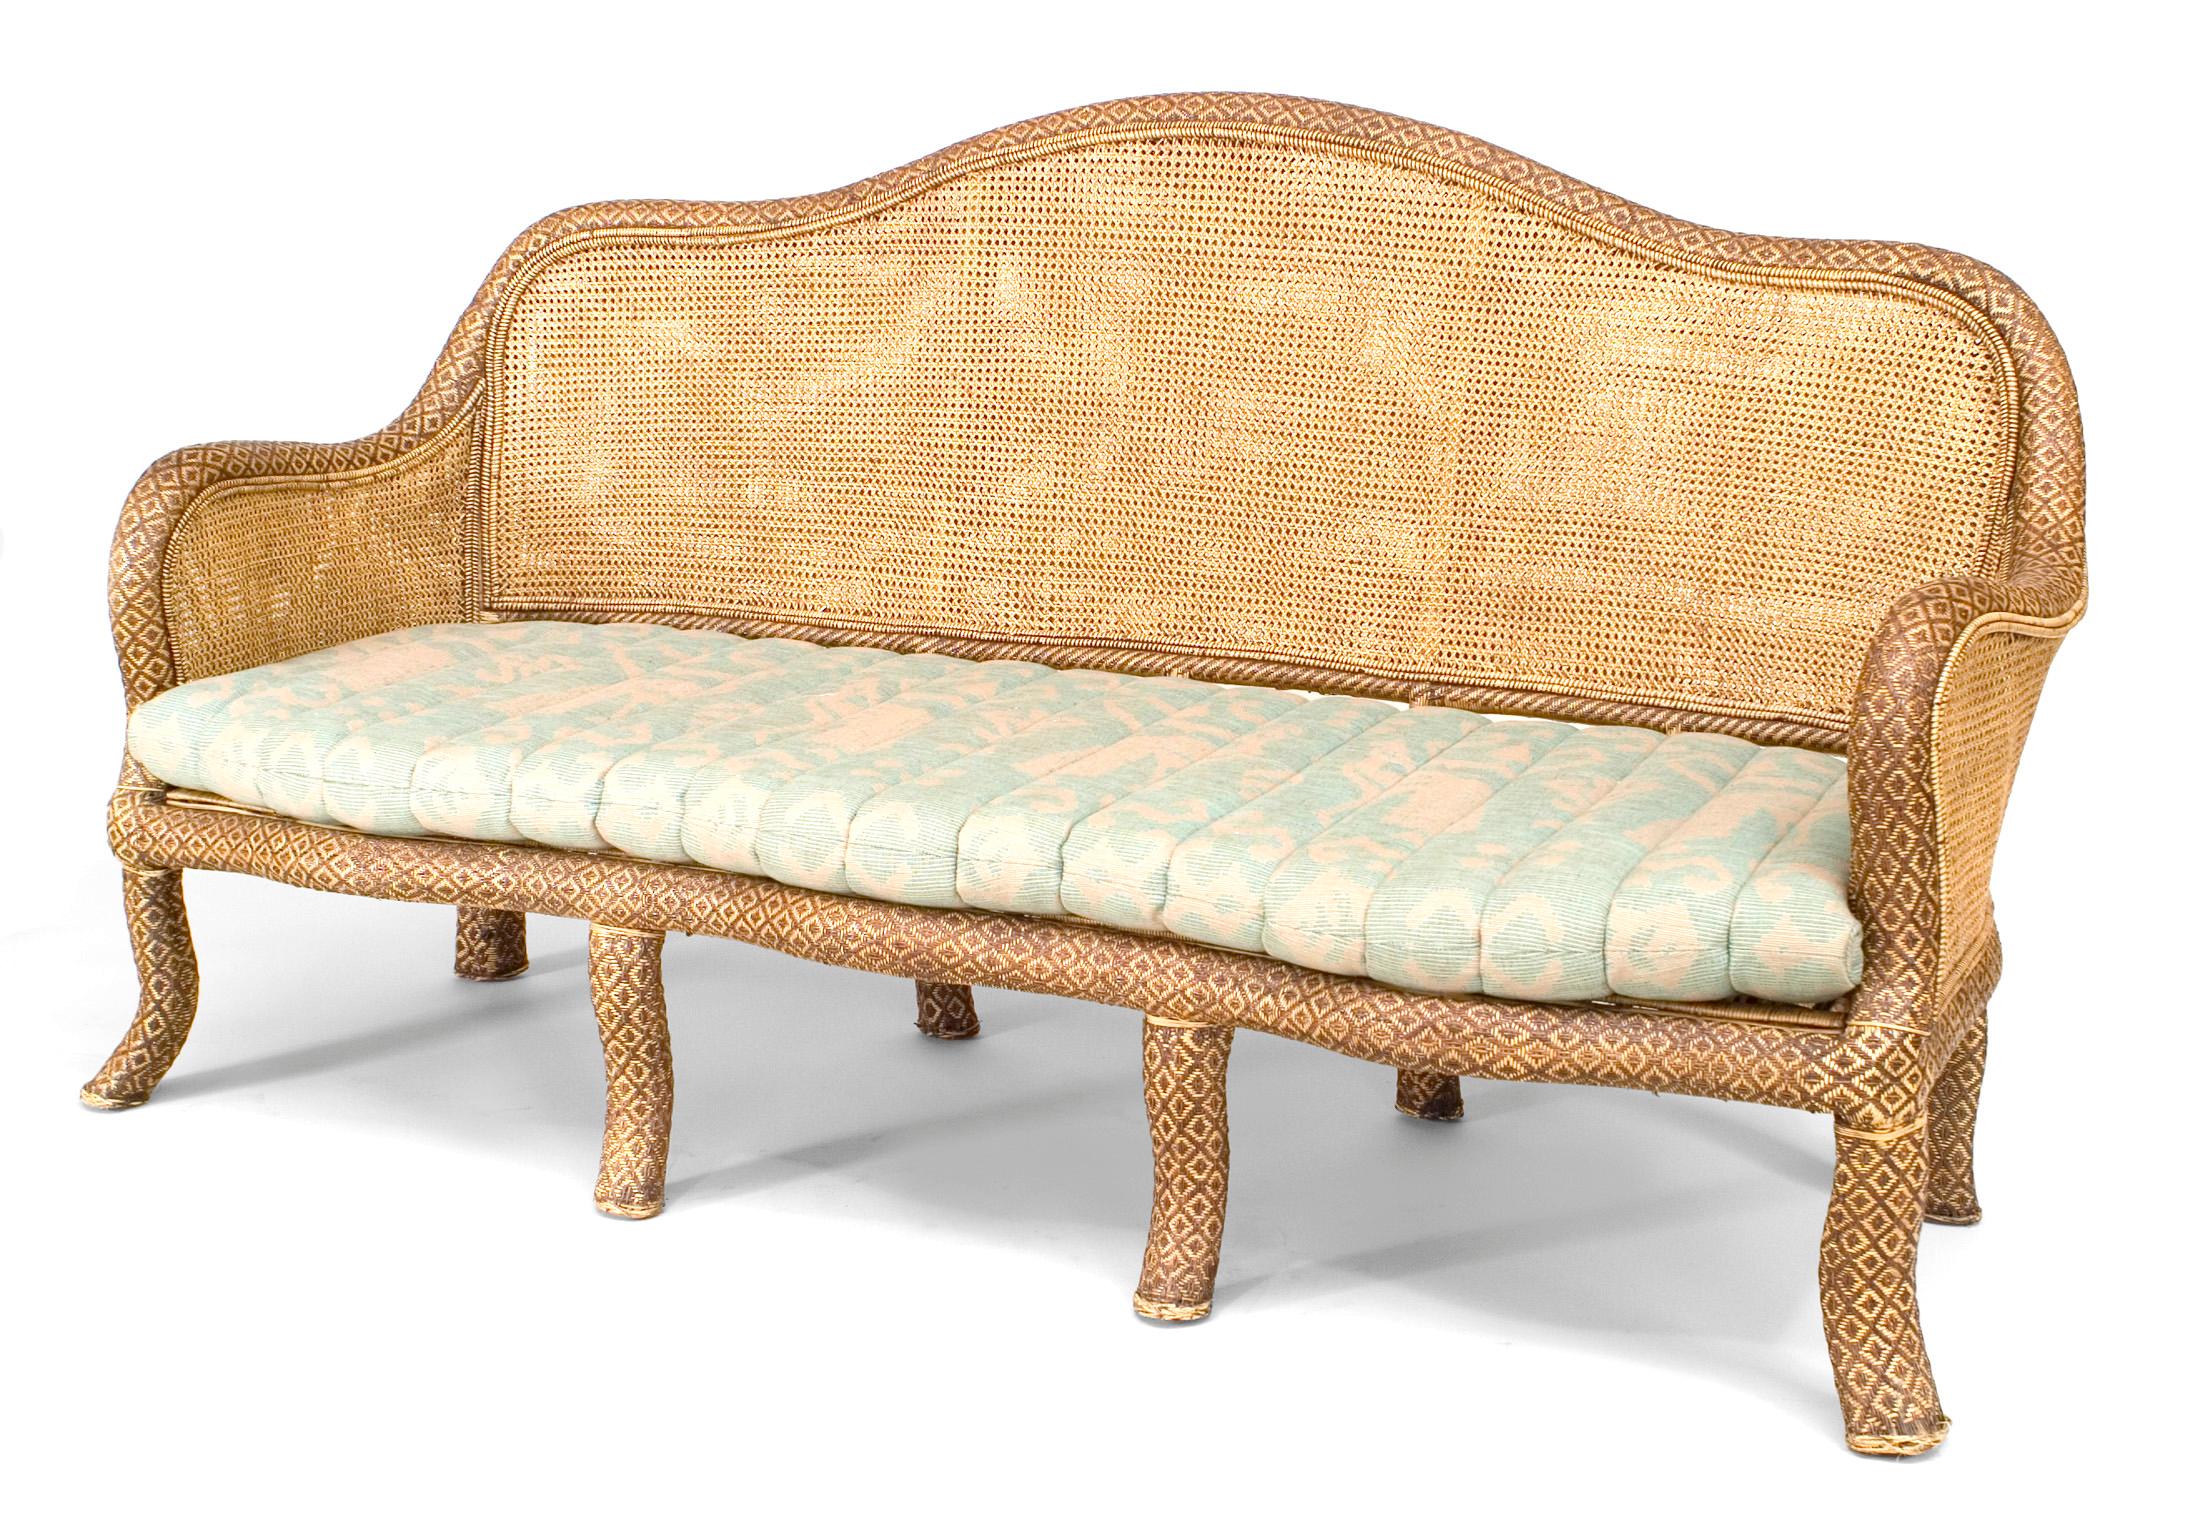 English 'Anglo-Indian style' natural wicker settee with shaped back and cane seat and back, 20th century.
 